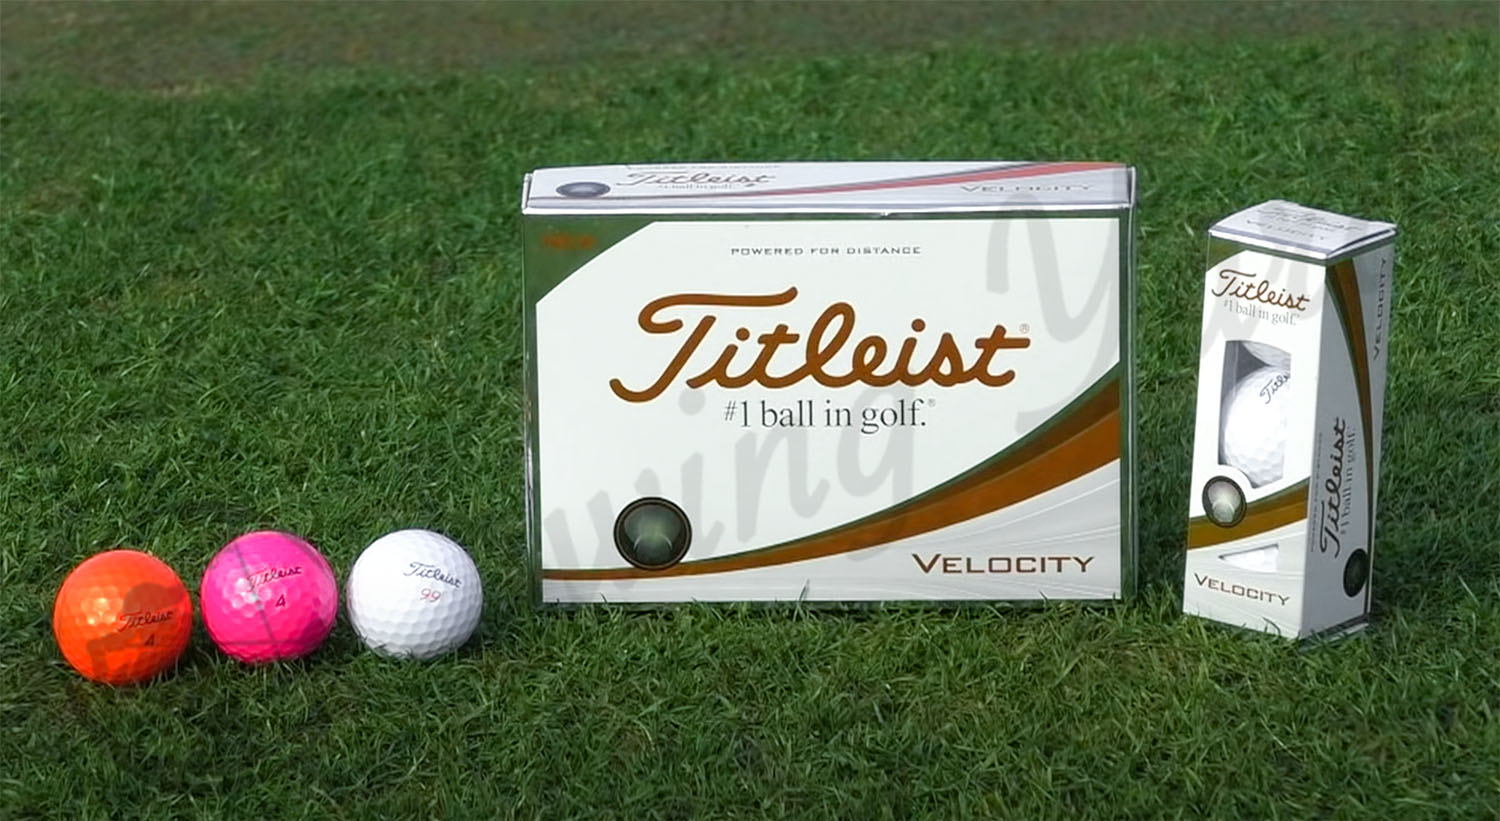 A box of Titleist Velocity in the grass at the golf course